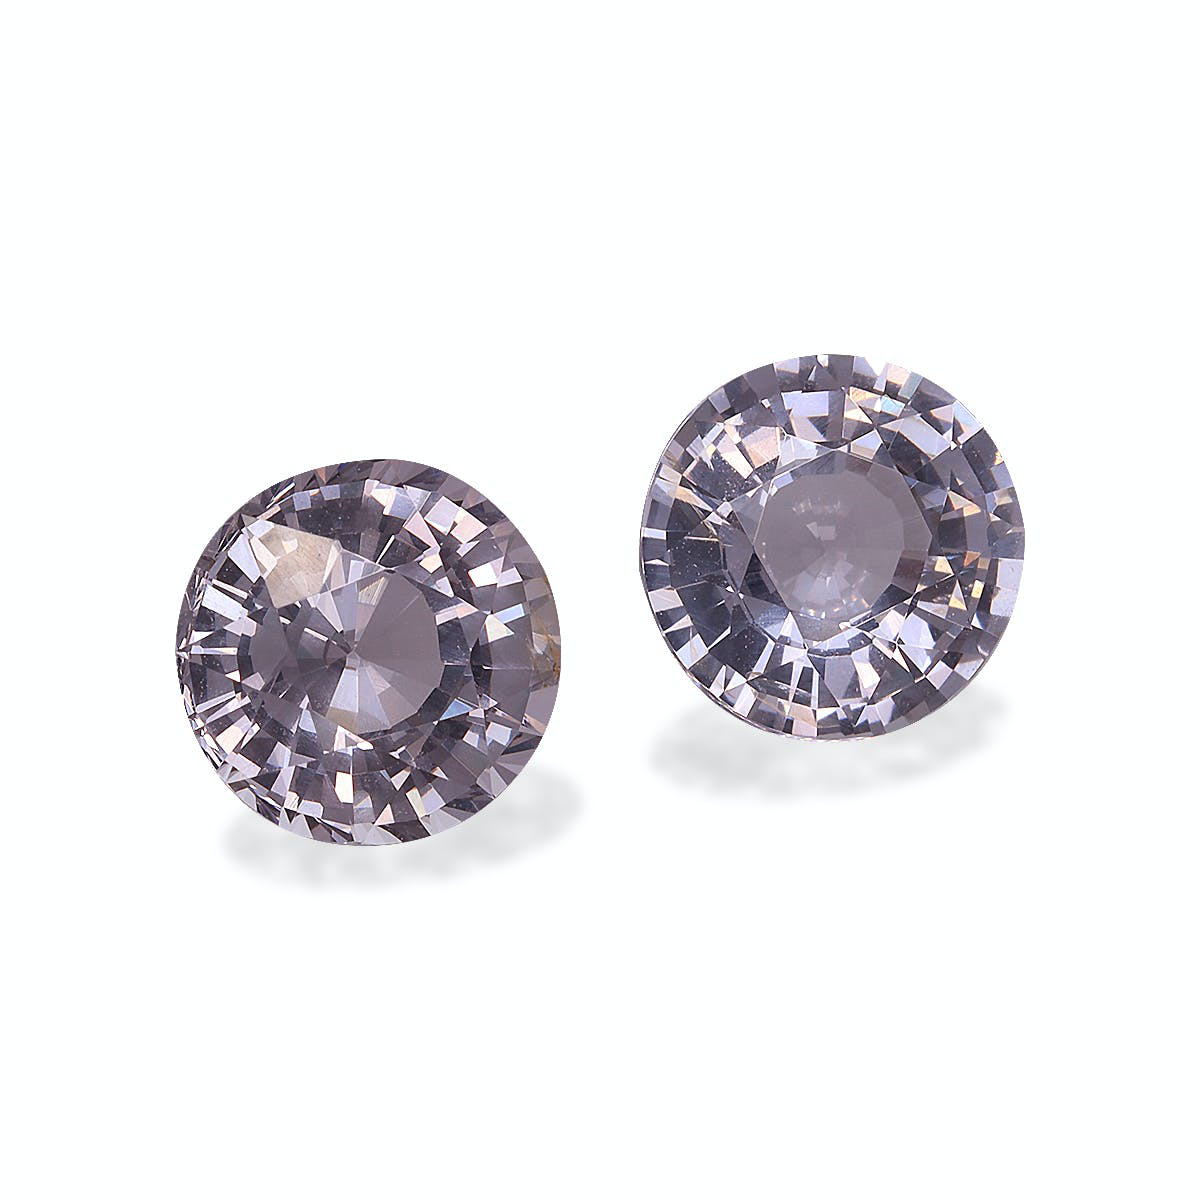 Picture of Silver Grey Spinel 3.82ct - 7mm (SP0380)